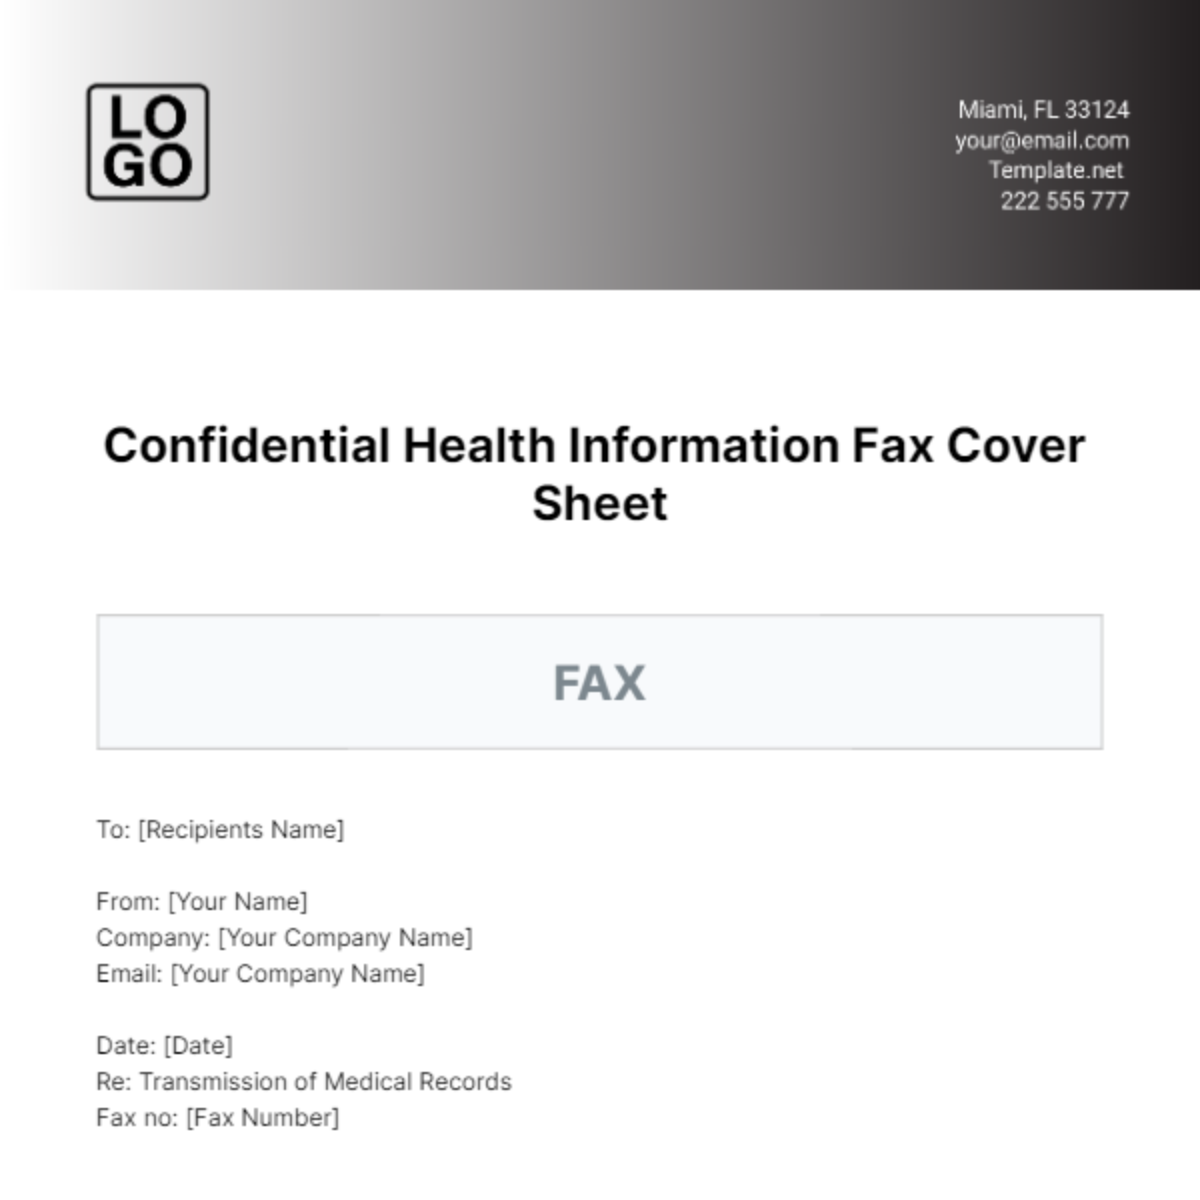 Free Confidential Health Information Fax Cover Sheet